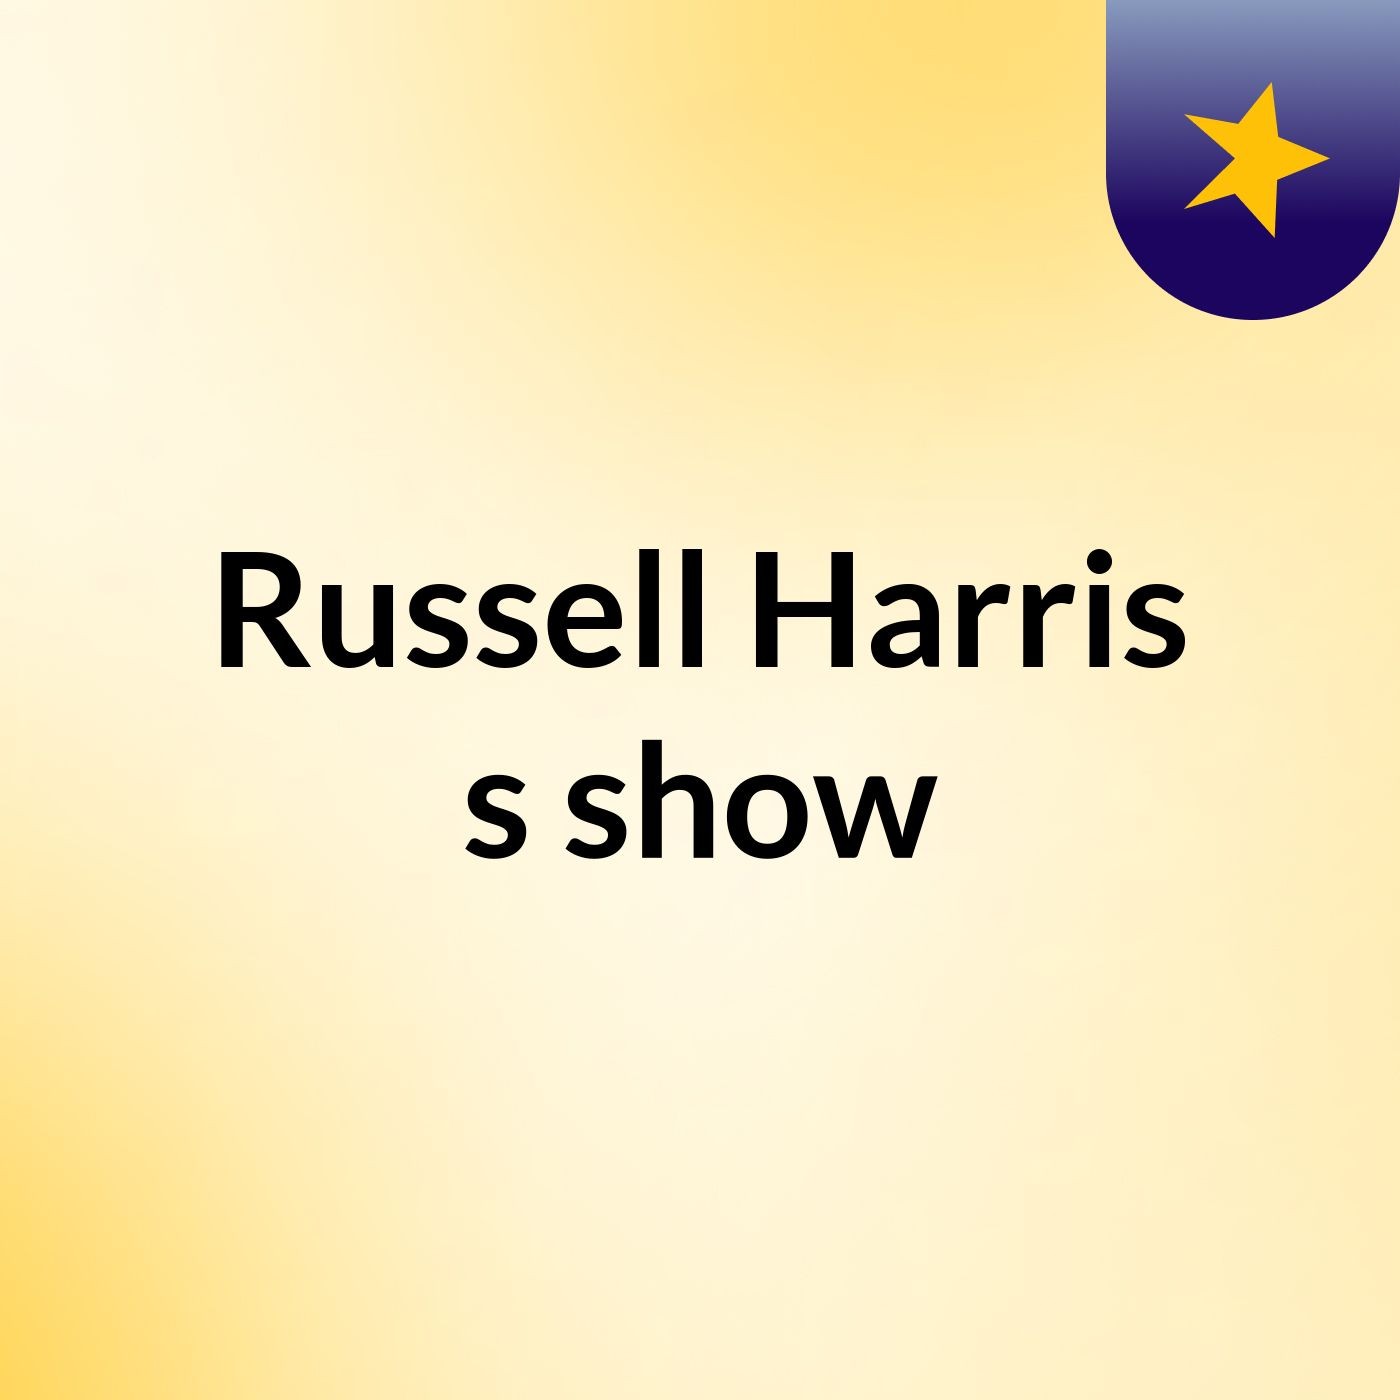 Russell Harris's show